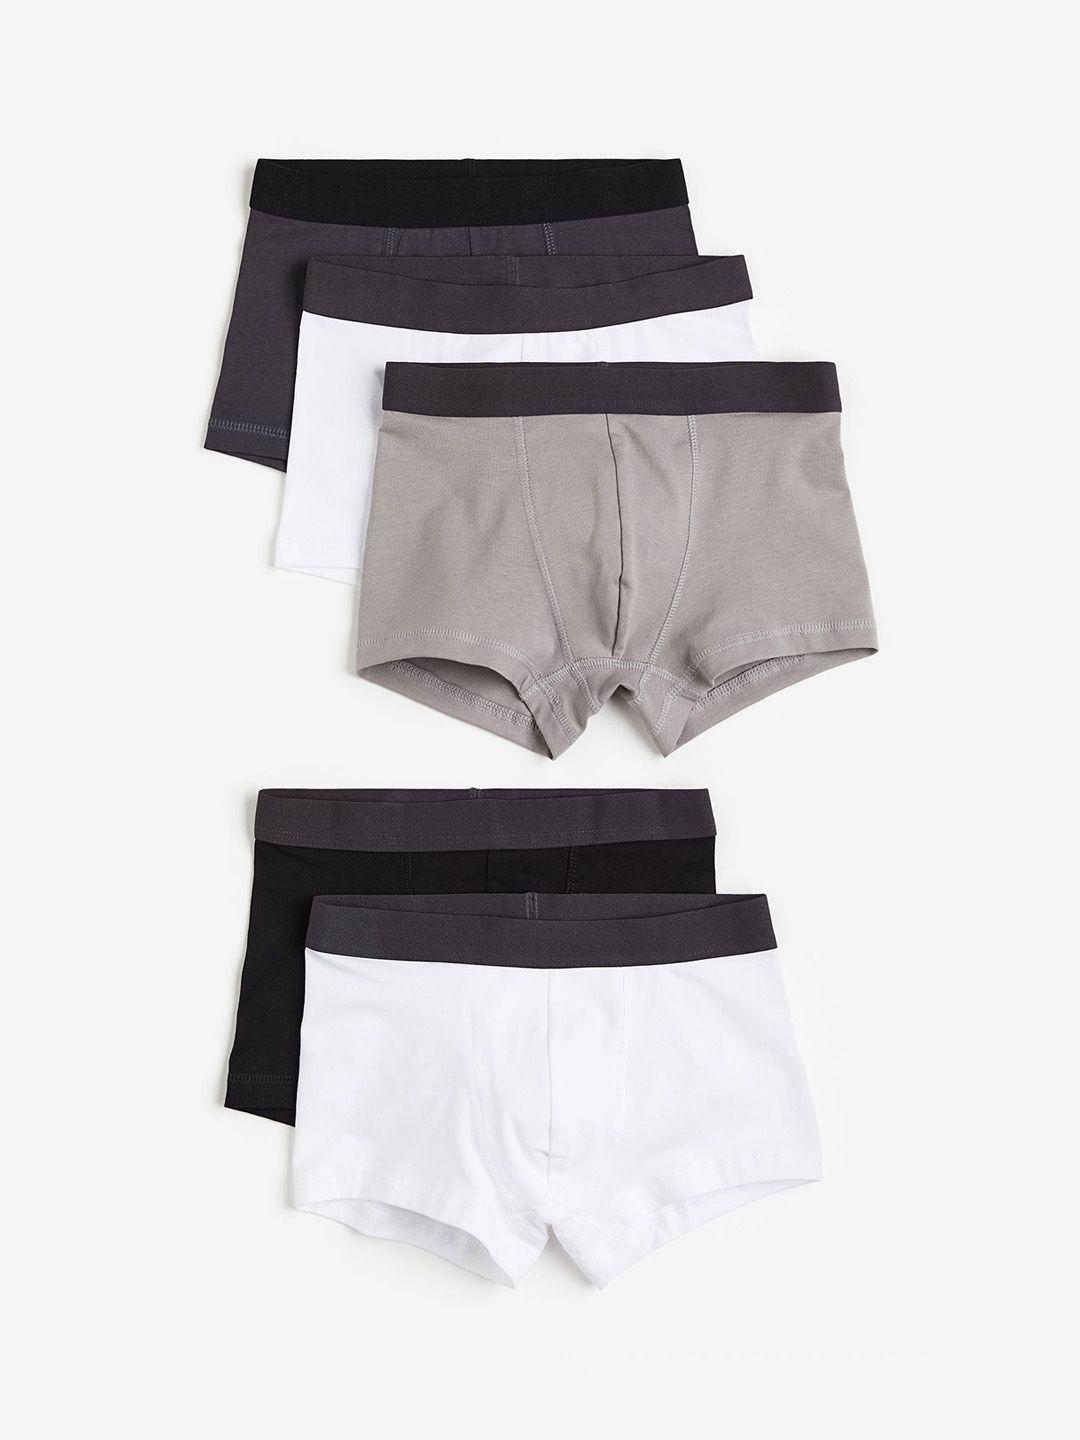 h&m-boys-pack-of-5-boxer-shorts-briefs